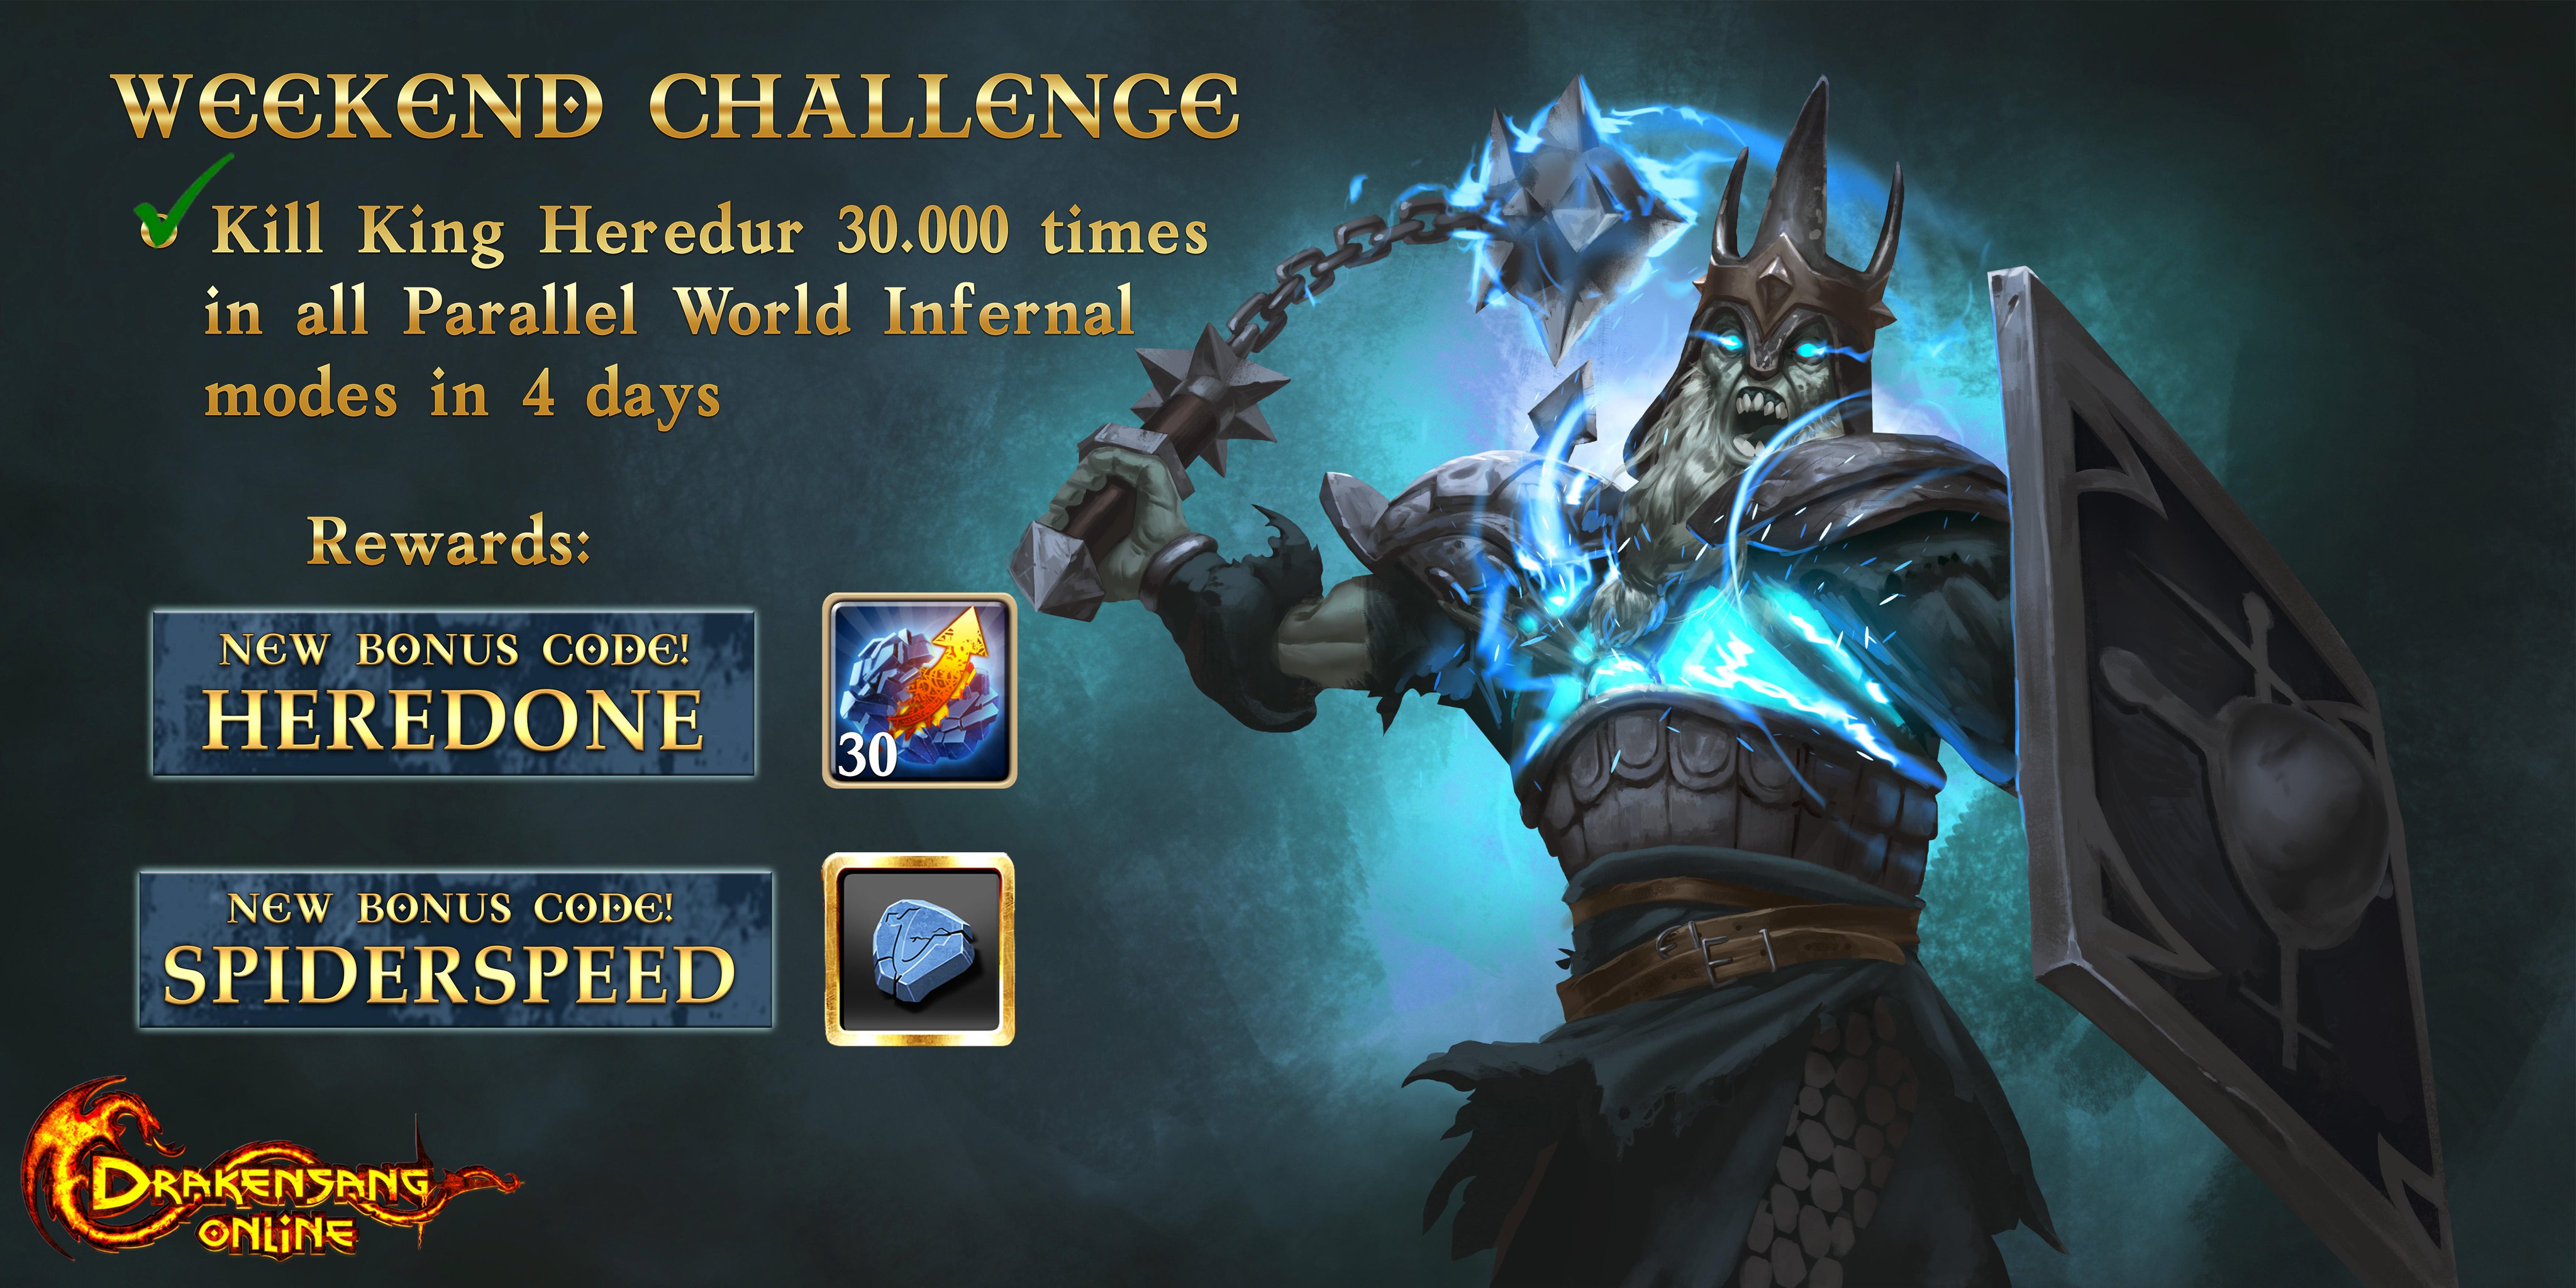 Drakensang Online on X: ⚔️WEEKEND CHALLENGE⚔️ ✔️Challenge complete: King  Heredur was defeated 38.046 times in all Parallel World Infernal modes in 4  days! 🏆Use the bonus code HEREDONE for 30x Augment Cores